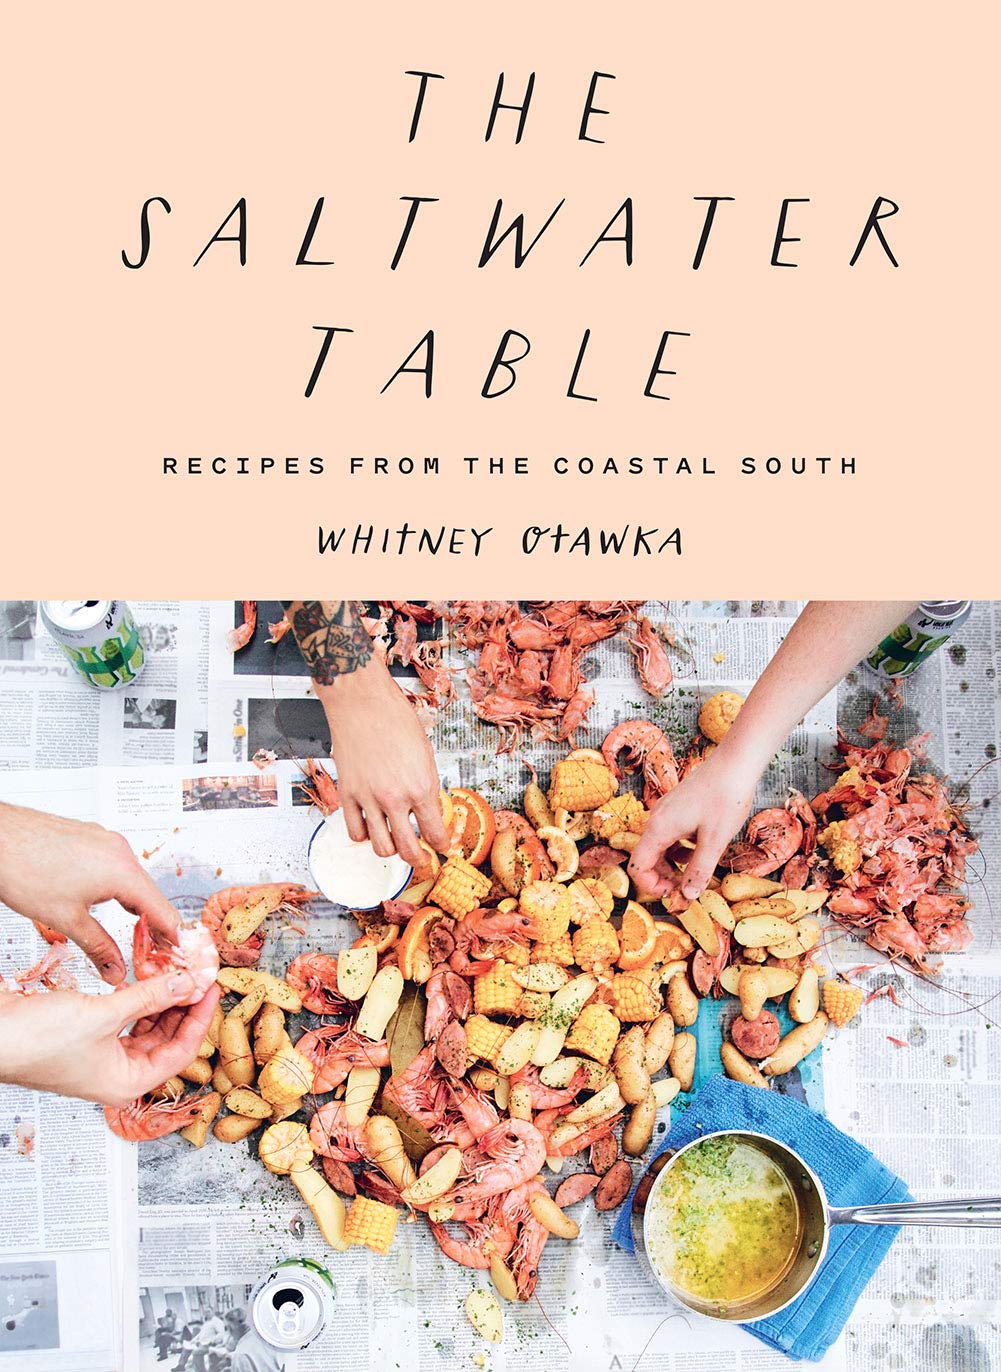 The Saltwater Table: Recipes from the Coastal South (Whitney Otawka)